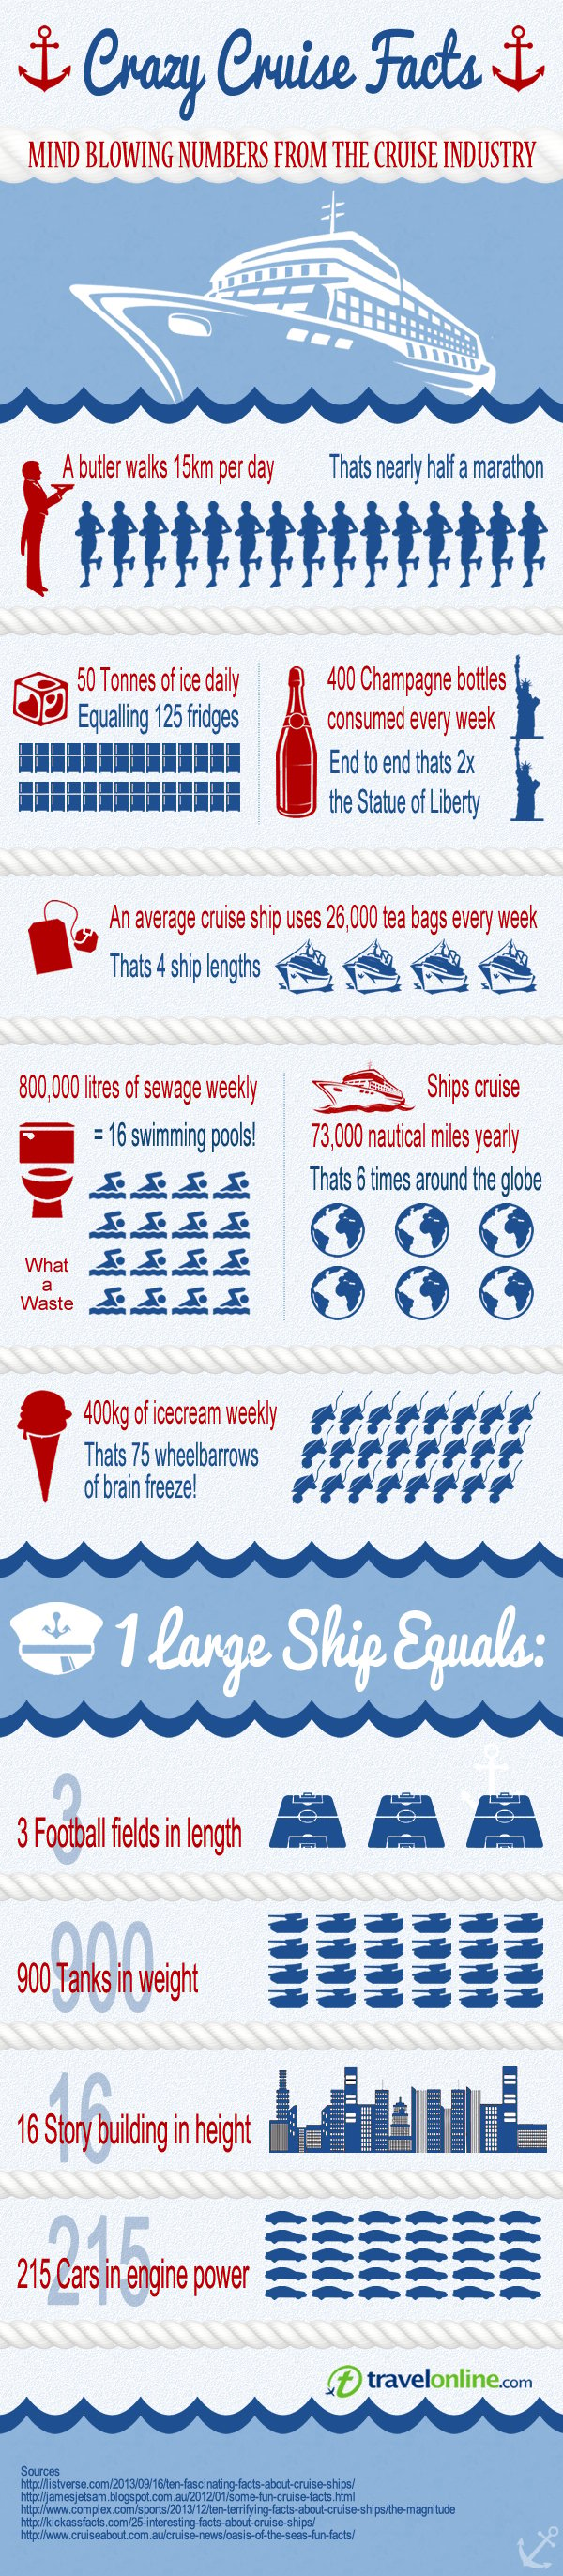 Crazy Cruise Facts